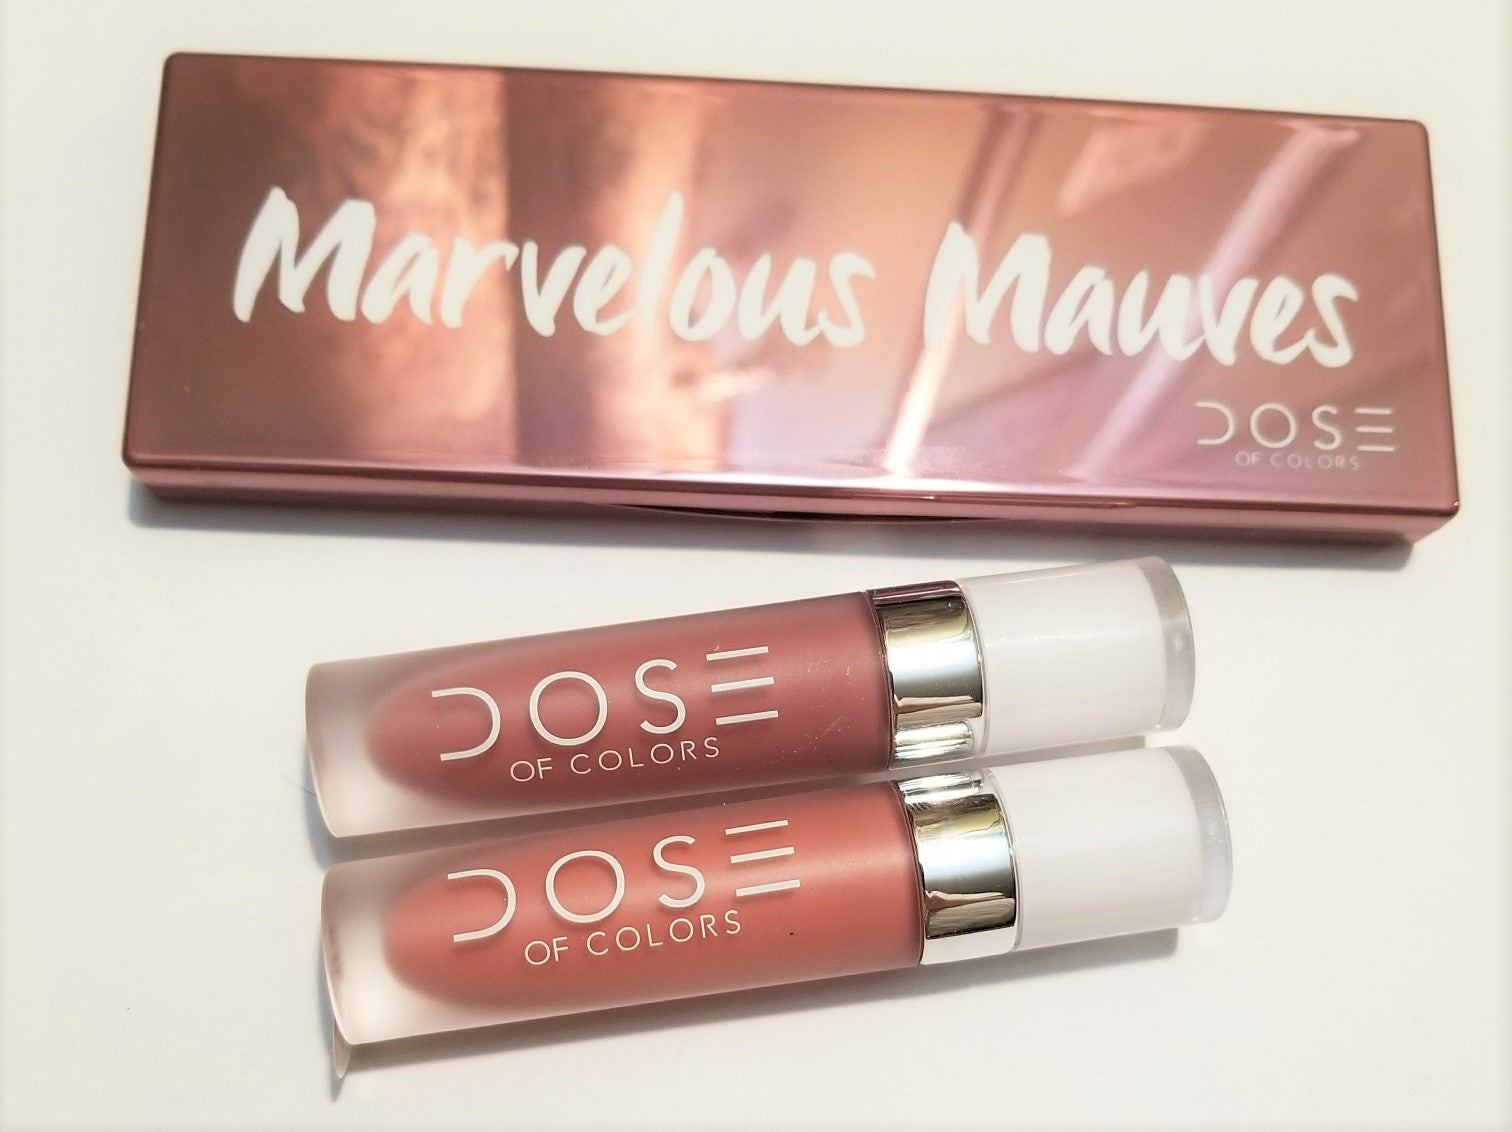 Review, Swatches, Makeup Trends 2018, 2019: Dose of Colors Marvelous Mauves Eyeshadow Palette, Matte Liquid Lipstick, Stone, Bare With Me